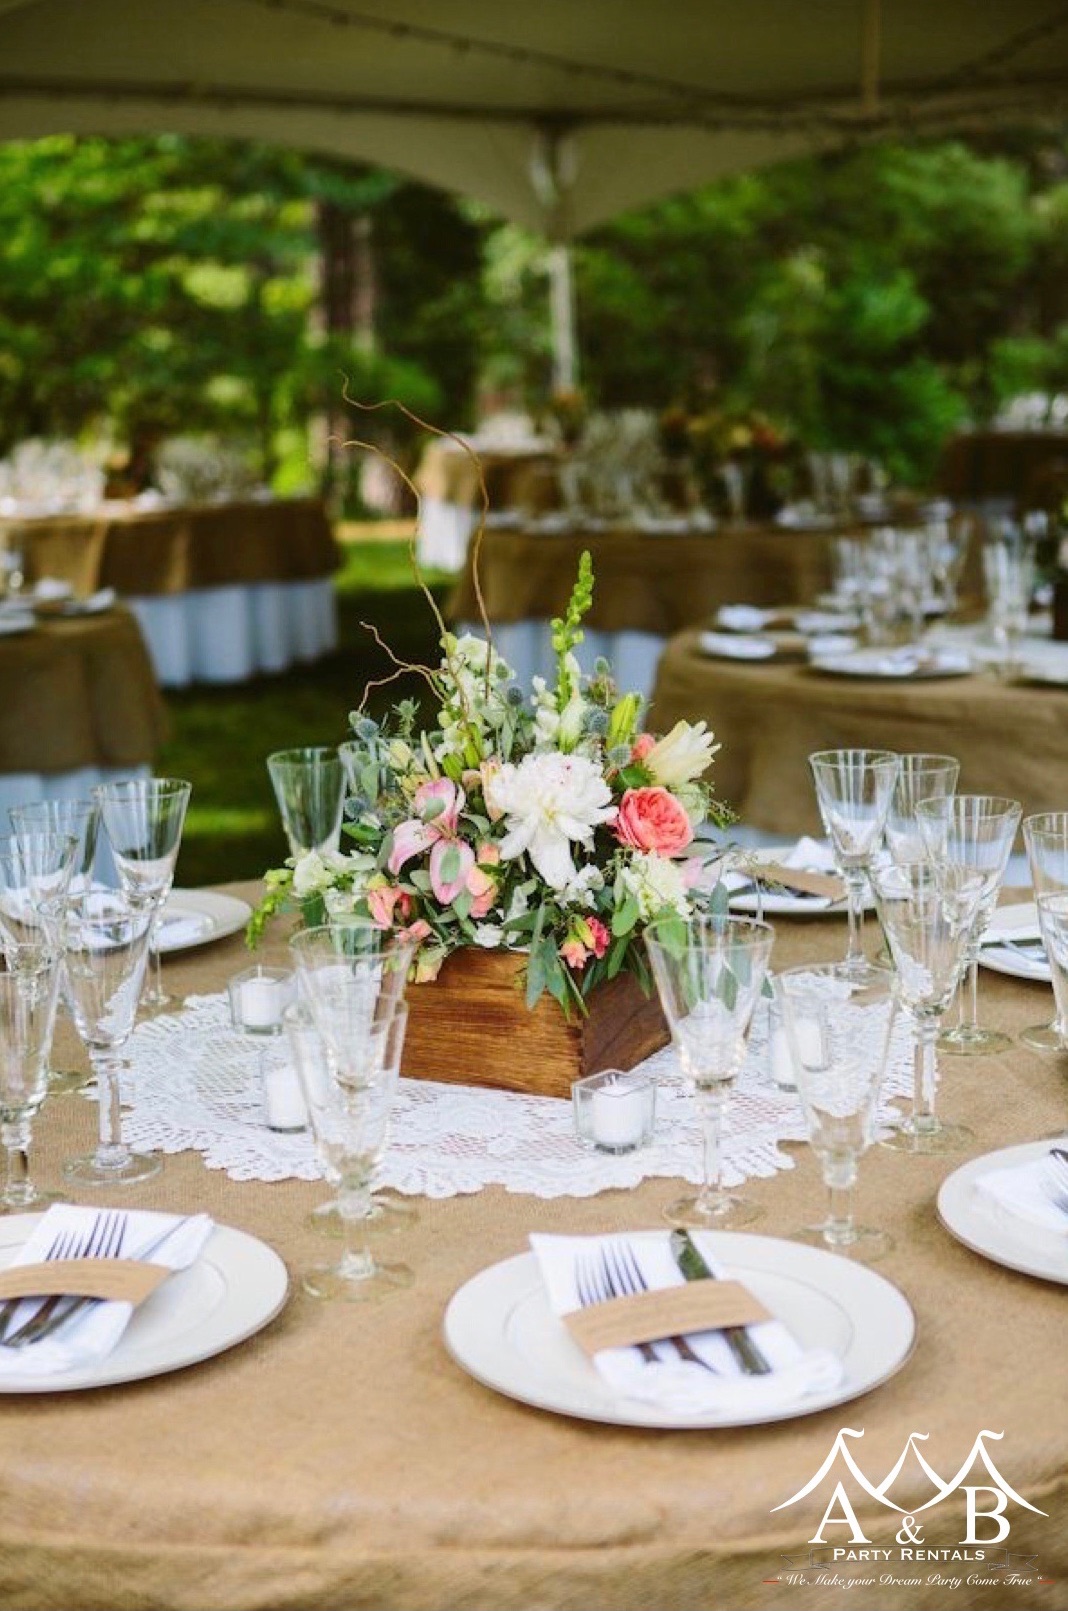 A close-up of a round table with wedding settings, a floral centerpiece, and various similar tables under a tent at a wedding. Image represents elegant table settings at a wedding event provided by A&B Party Rentals in Salisbury, MD.